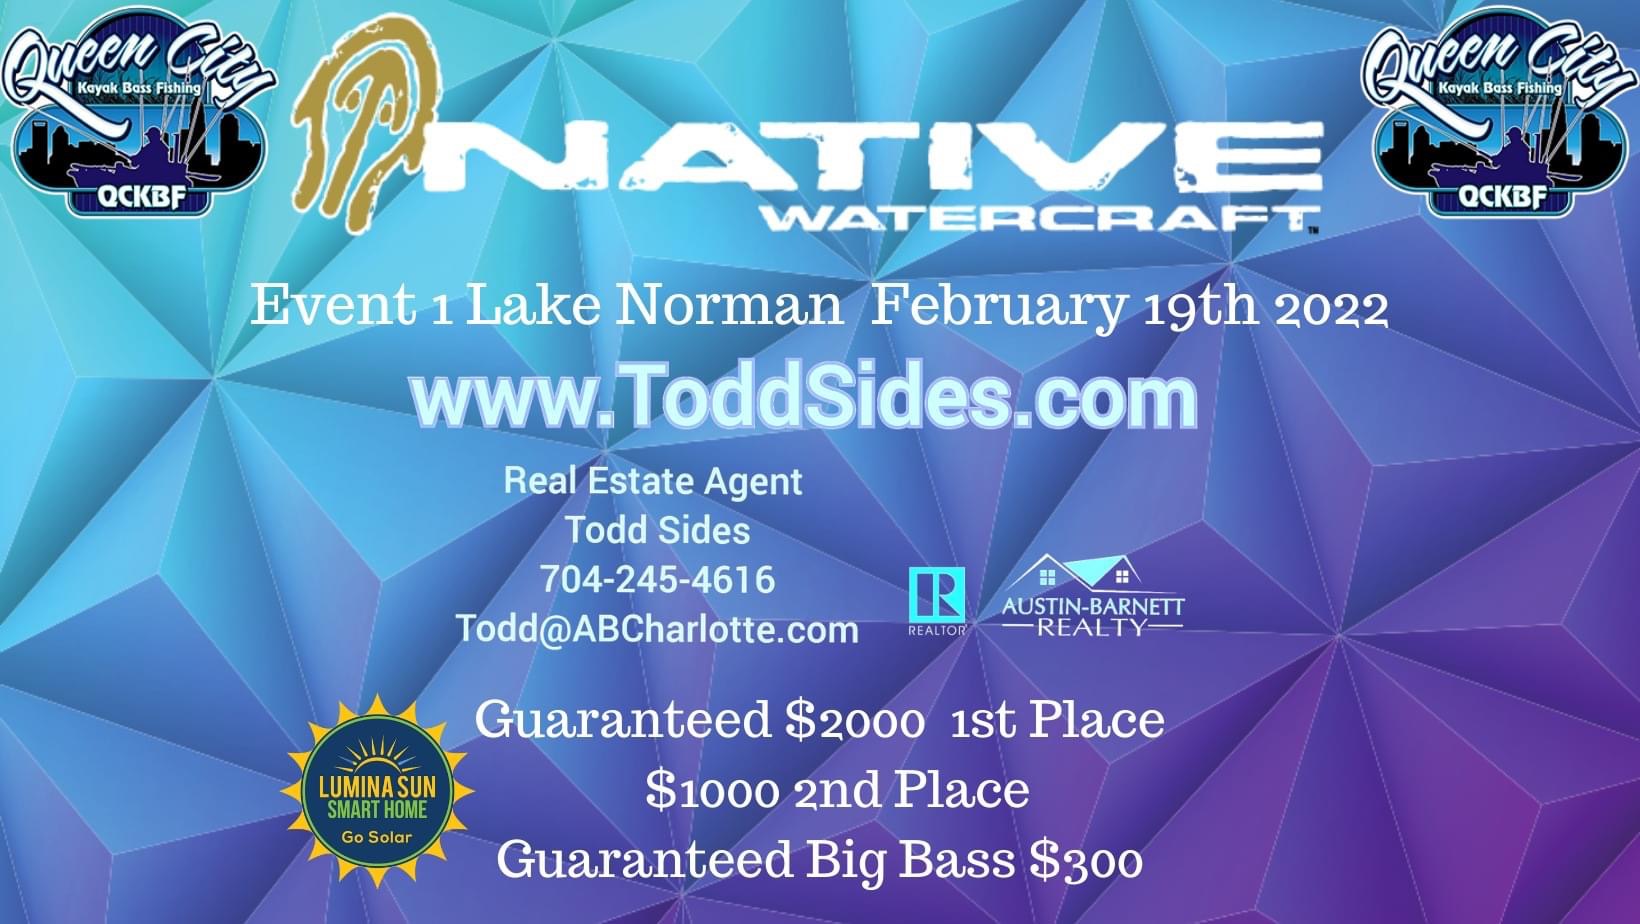 Event 1 Lake Norman Presented by Todd Sides Realty